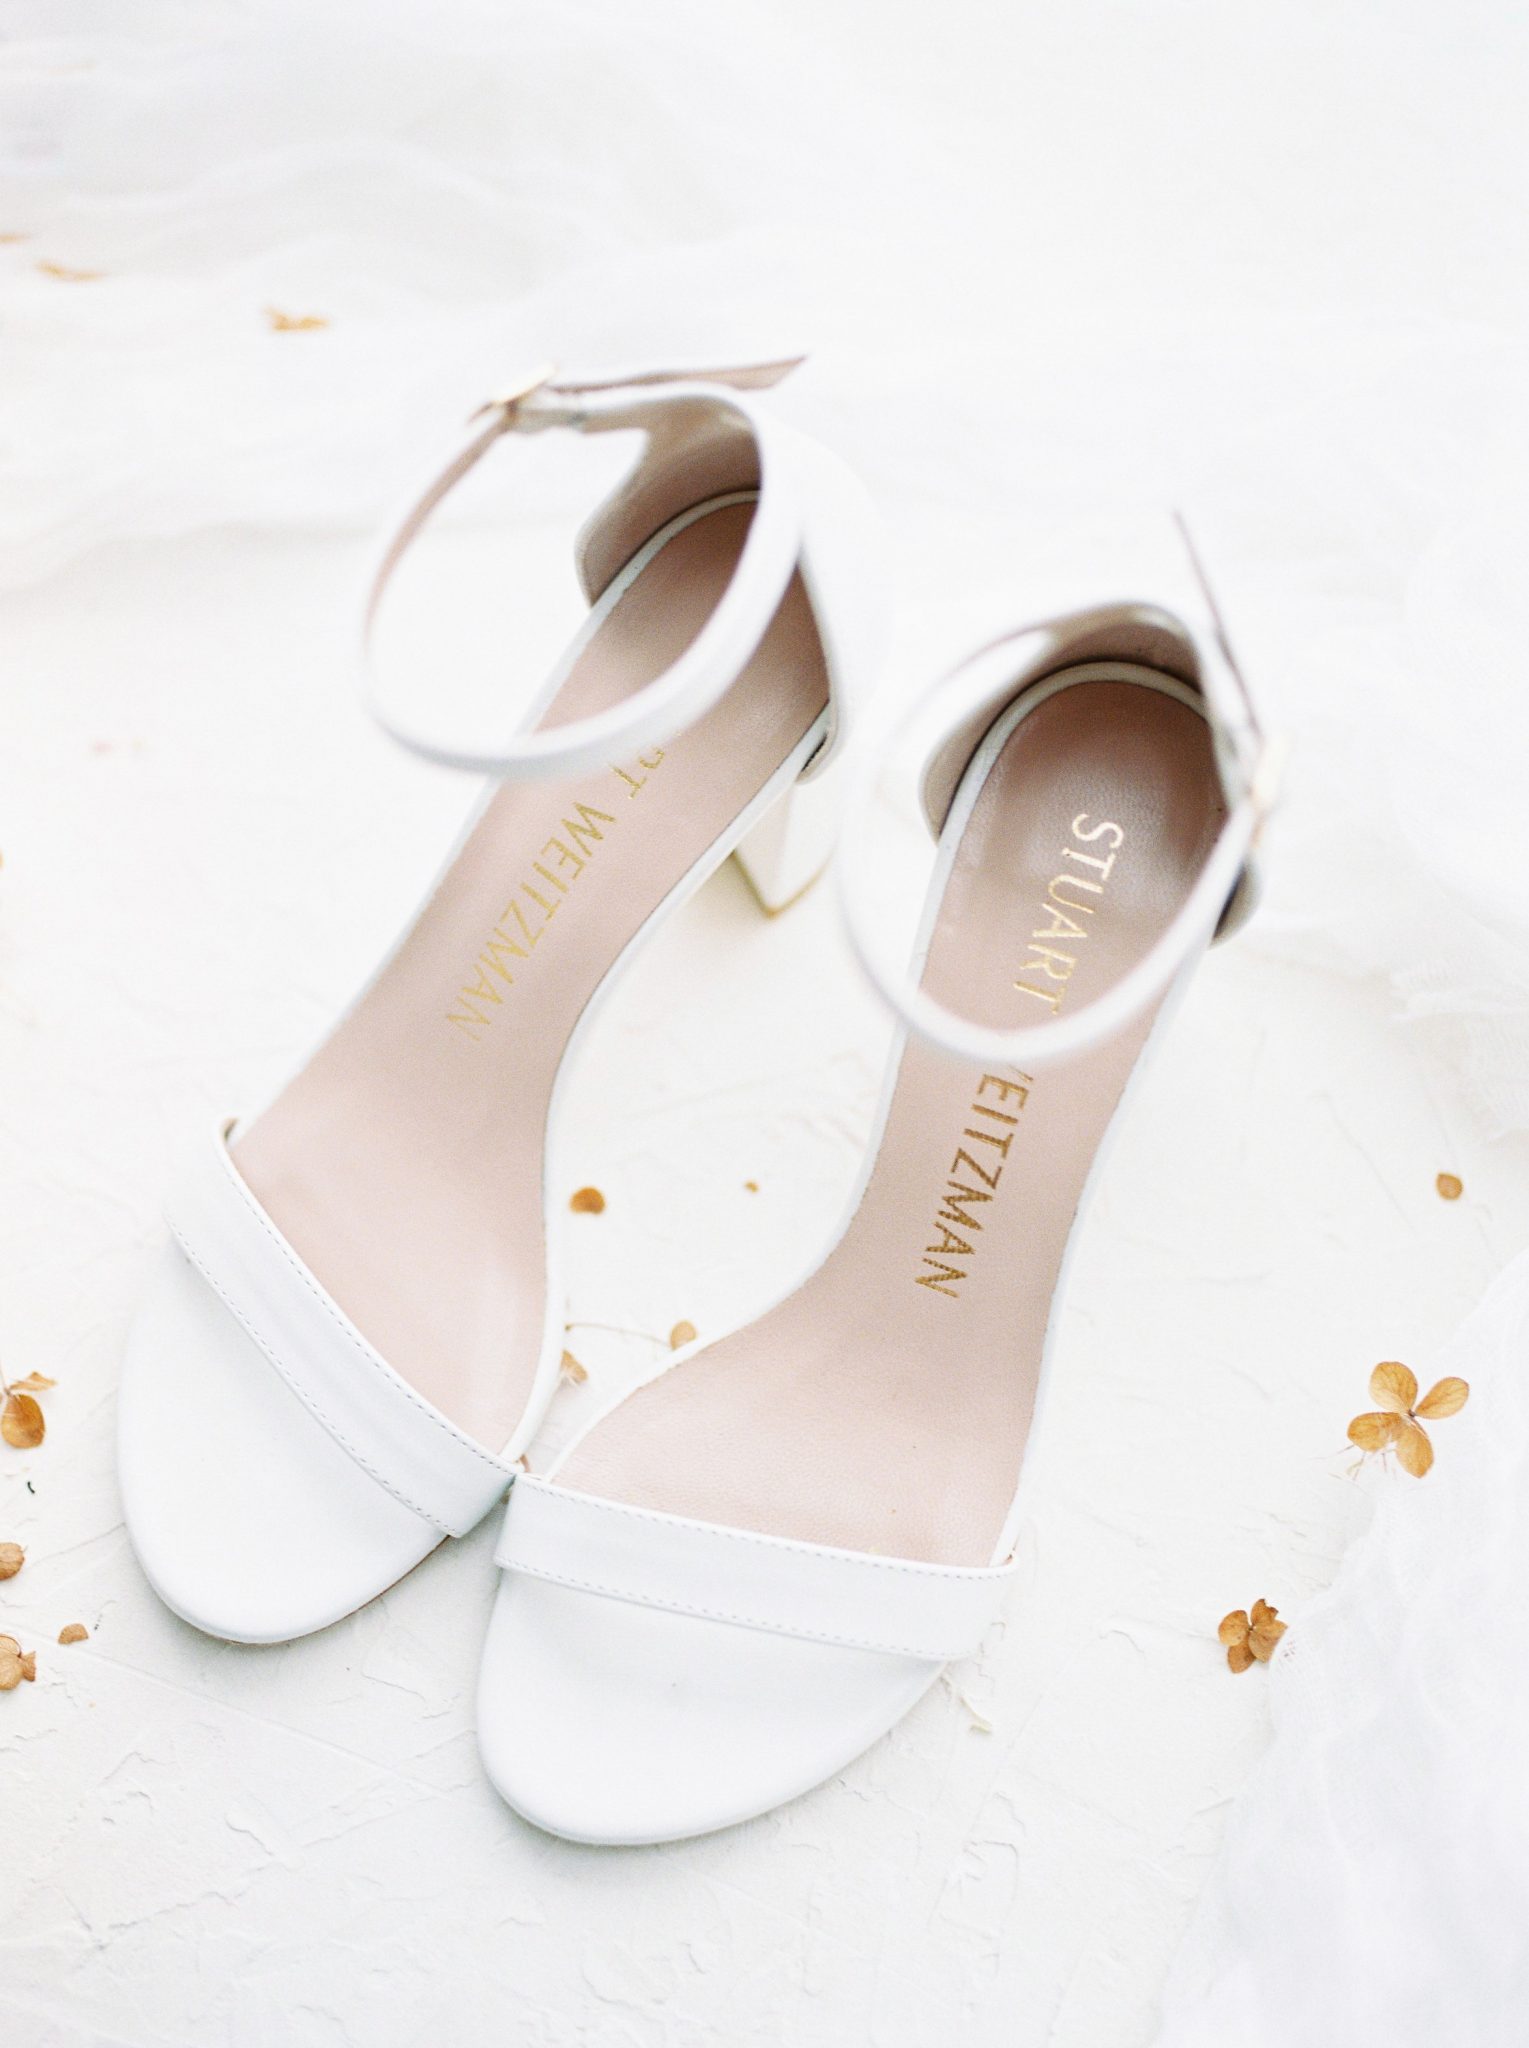 White Stuart Weitzman heels styled in front of a white backdrop for a modern Okanagan wedding ceremony